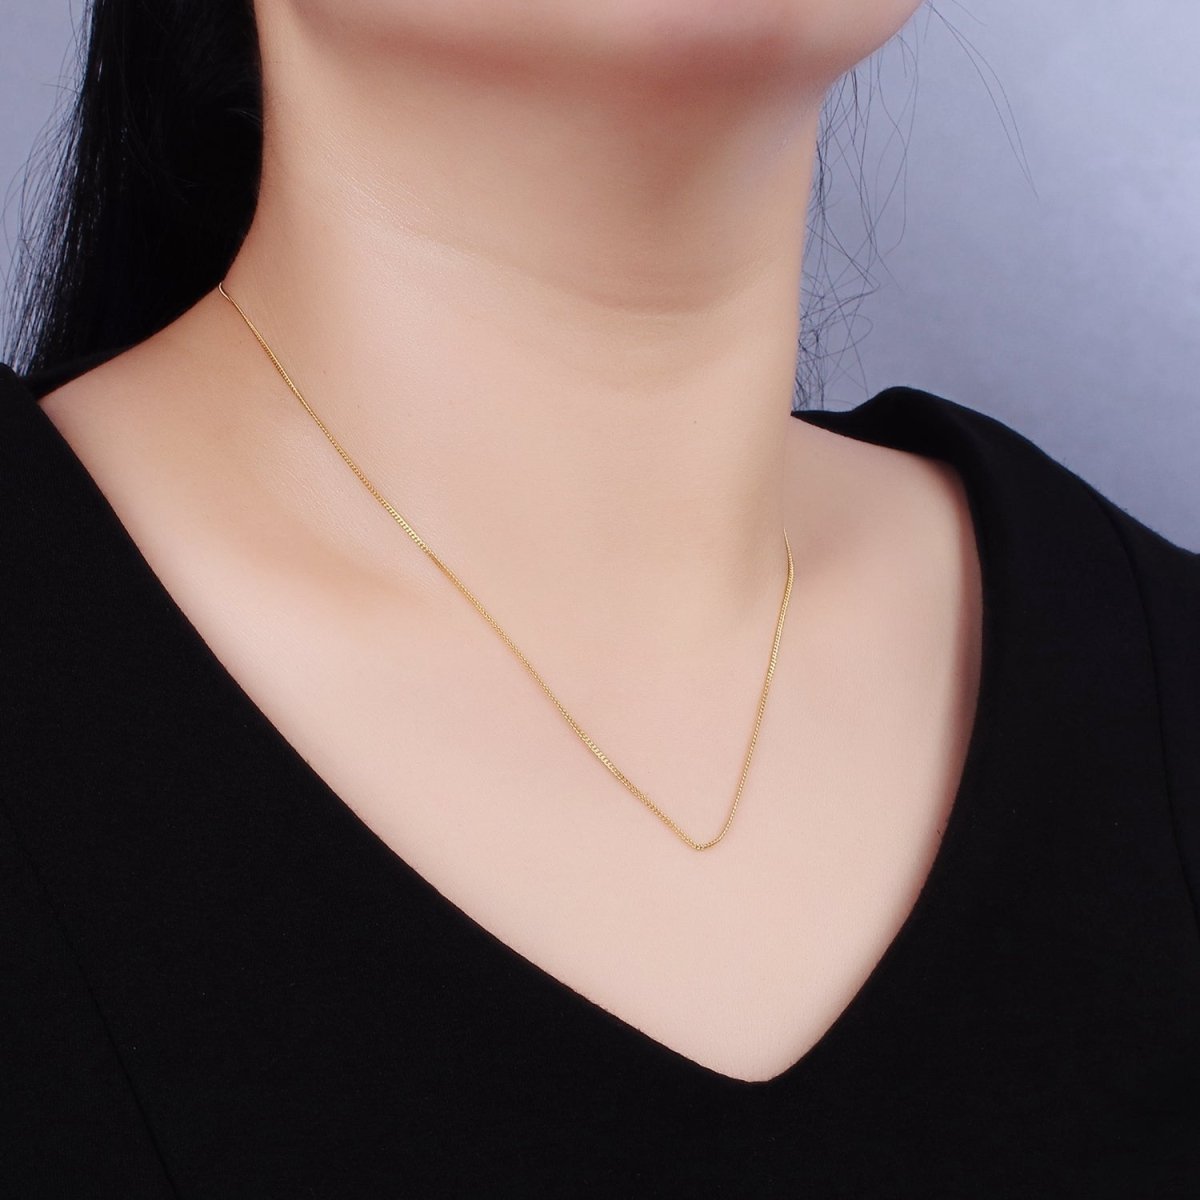 24K Gold Vermeil Necklace Chain, 925 Sterling Silver BOX Necklace Chain w/ Heavy Gold Plated | WA-2153 WA-2154 Clearance Pricing - DLUXCA